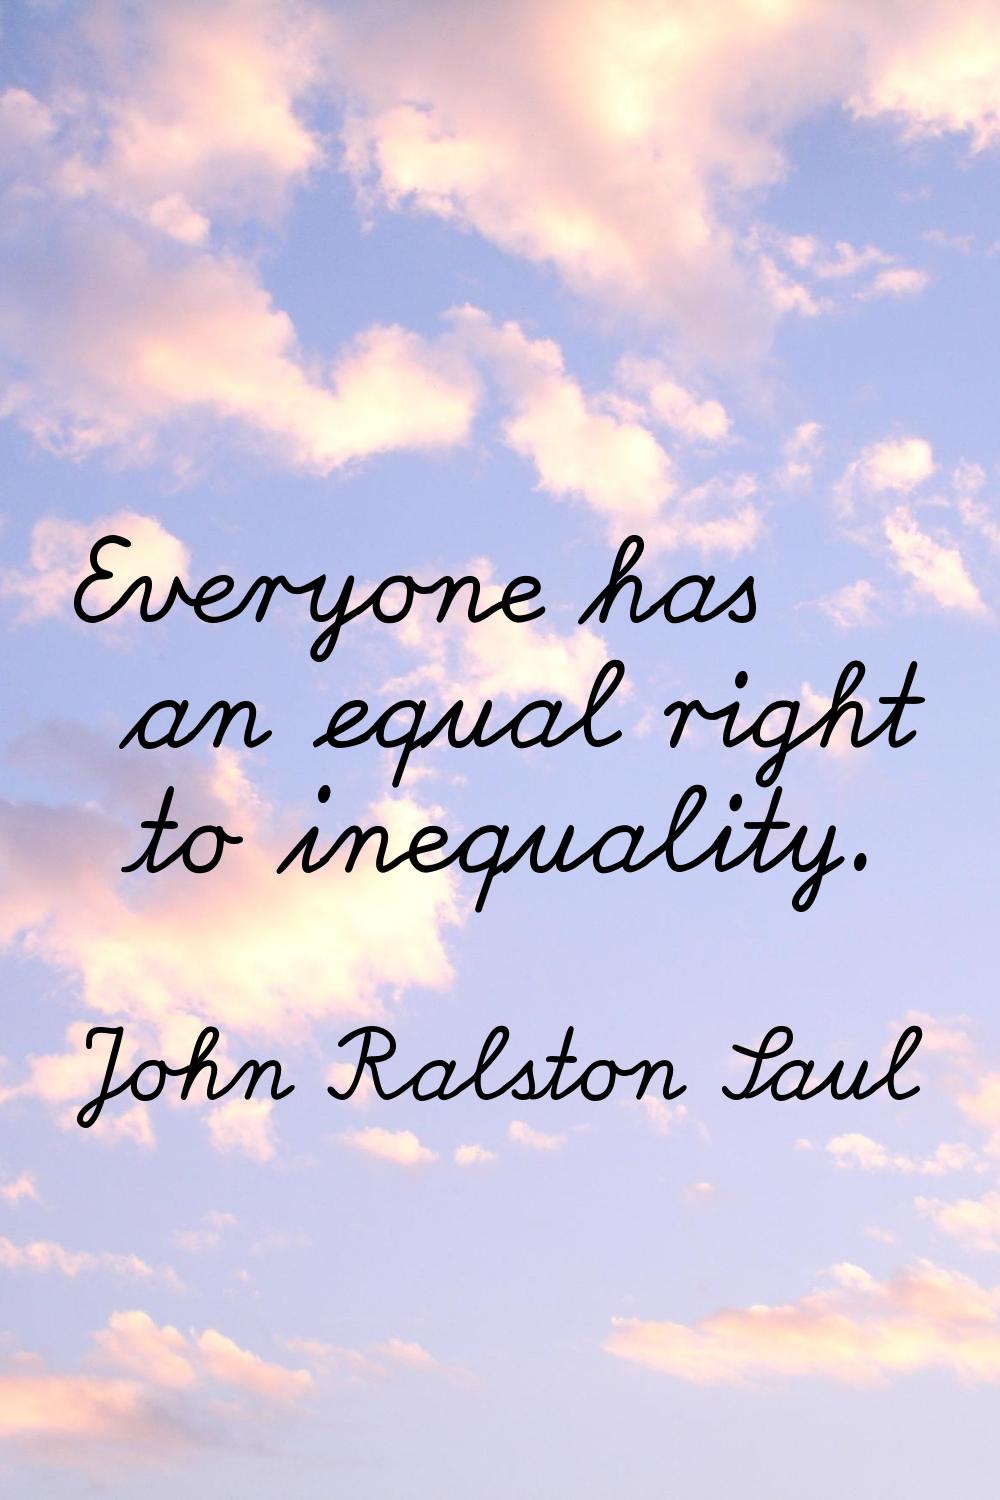 Everyone has an equal right to inequality.